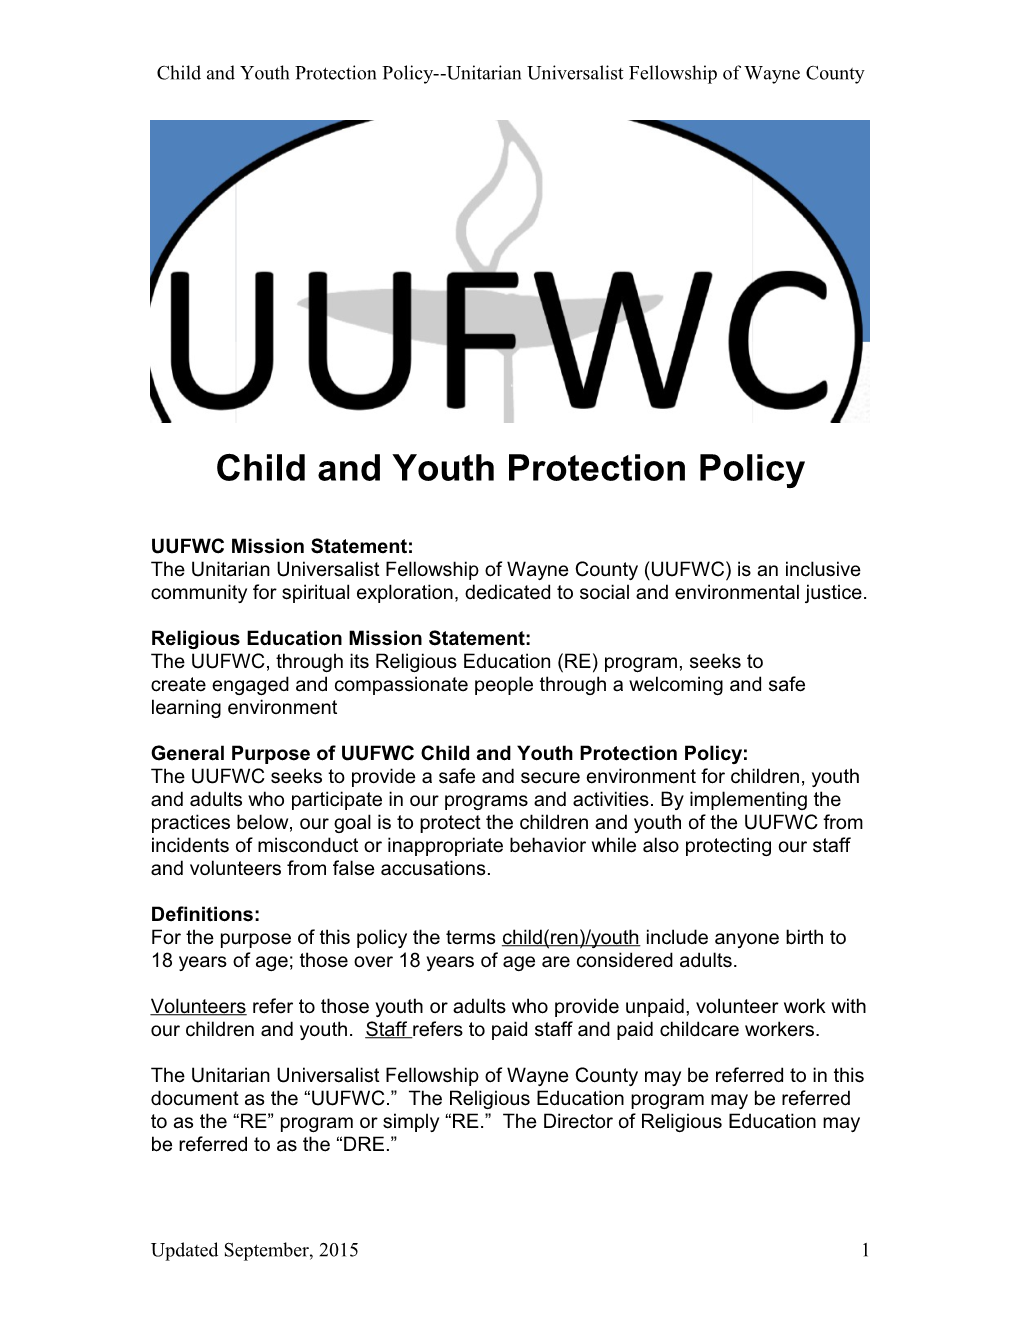 Child and Youth Protection Policy Unitarian Universalist Fellowship of Wayne County